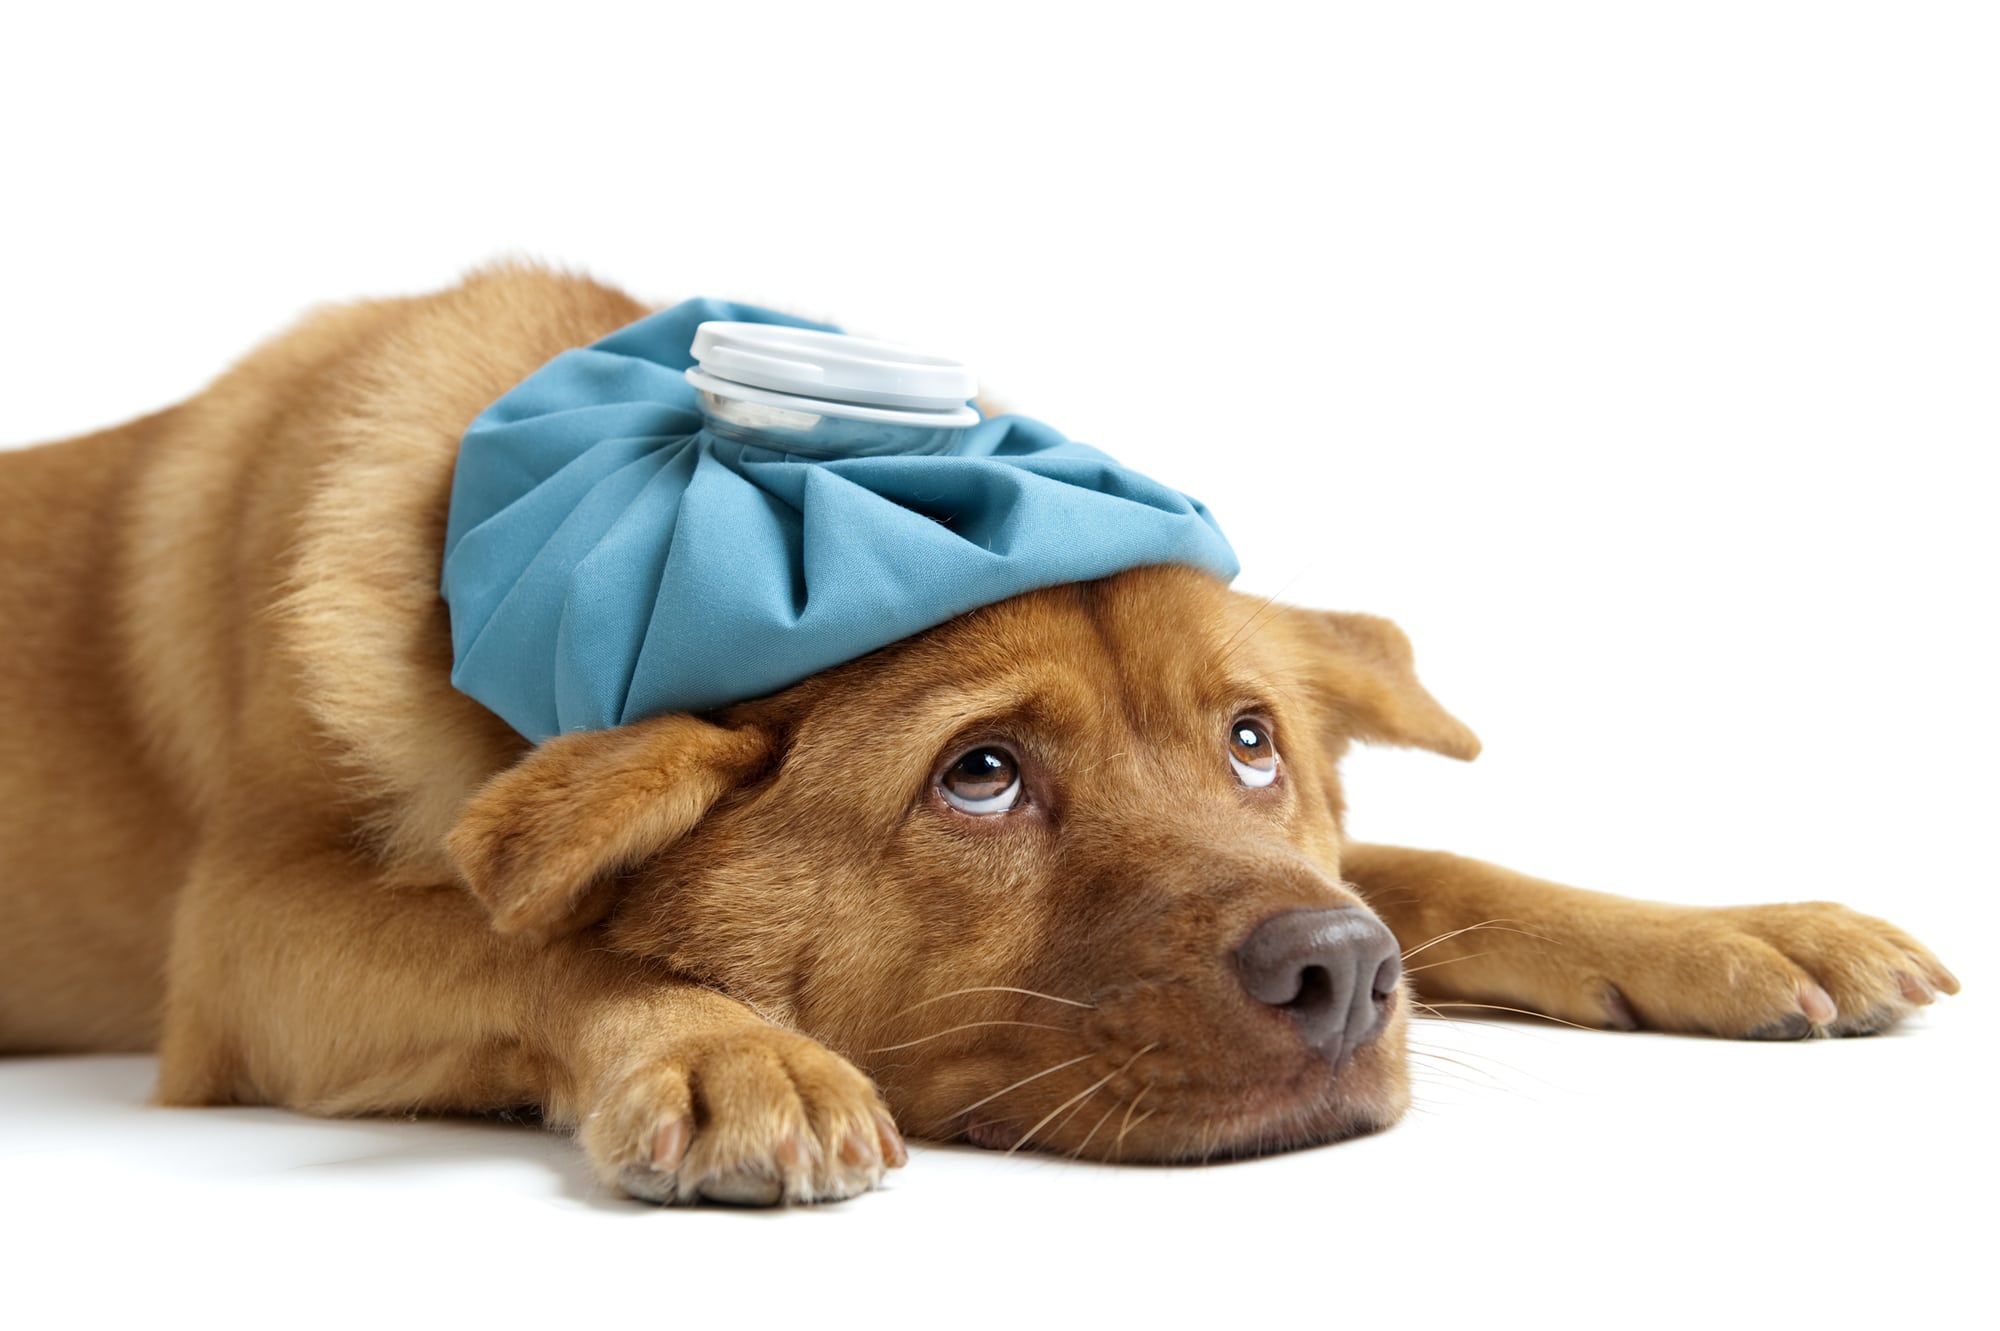 An illness is only one of the causes of diarrhea in dogs.